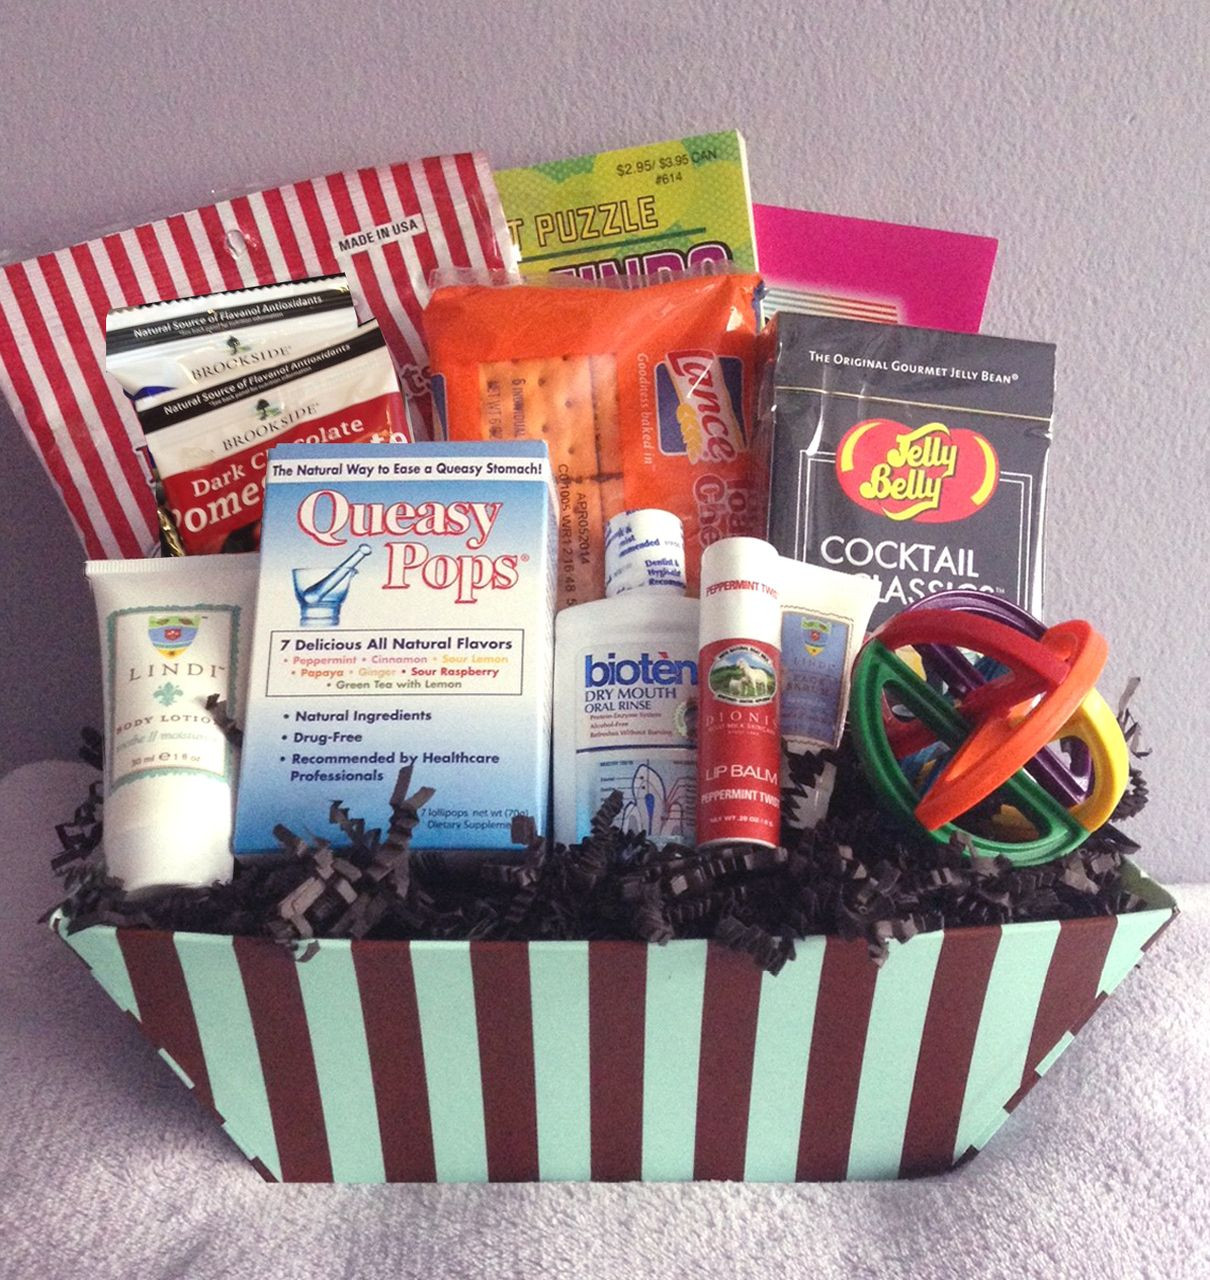 Gift Basket For Cancer Patient Ideas
 Men s Small Chemo Basket Care package ideas